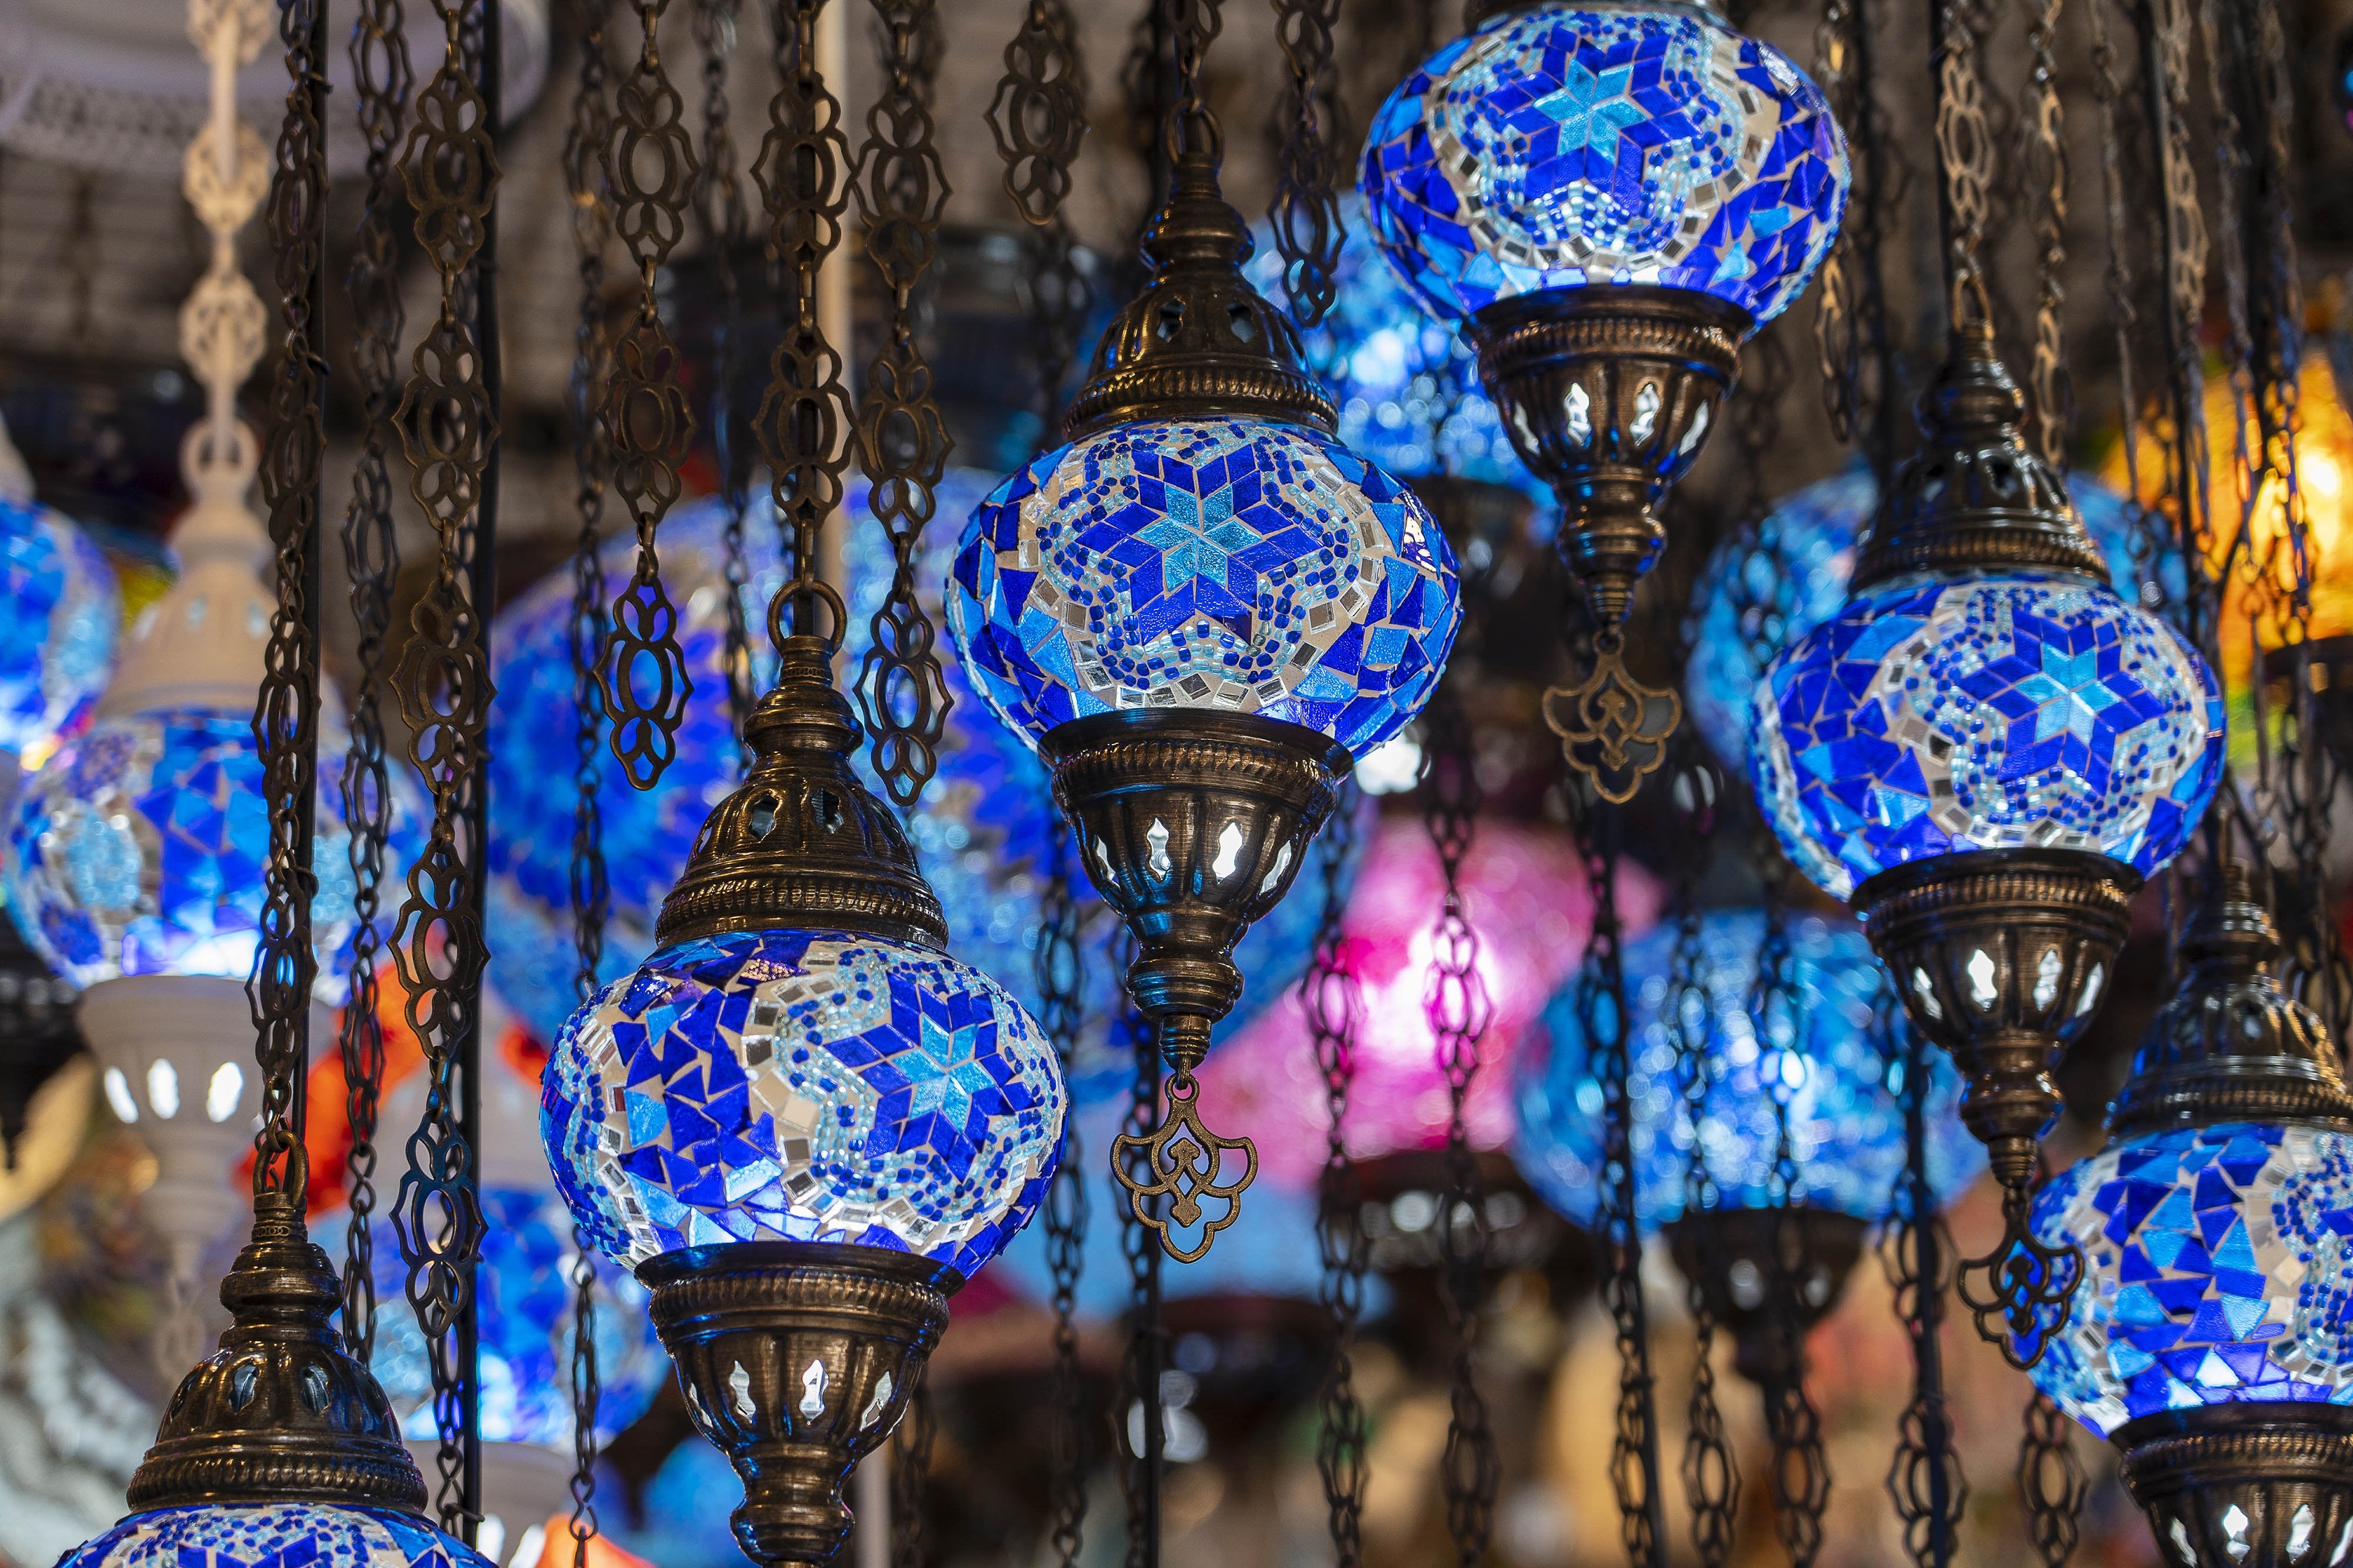 Beautiful Ramadan lamps in different shapes and sizes coming soon for sale  at Souk el Ottoman.